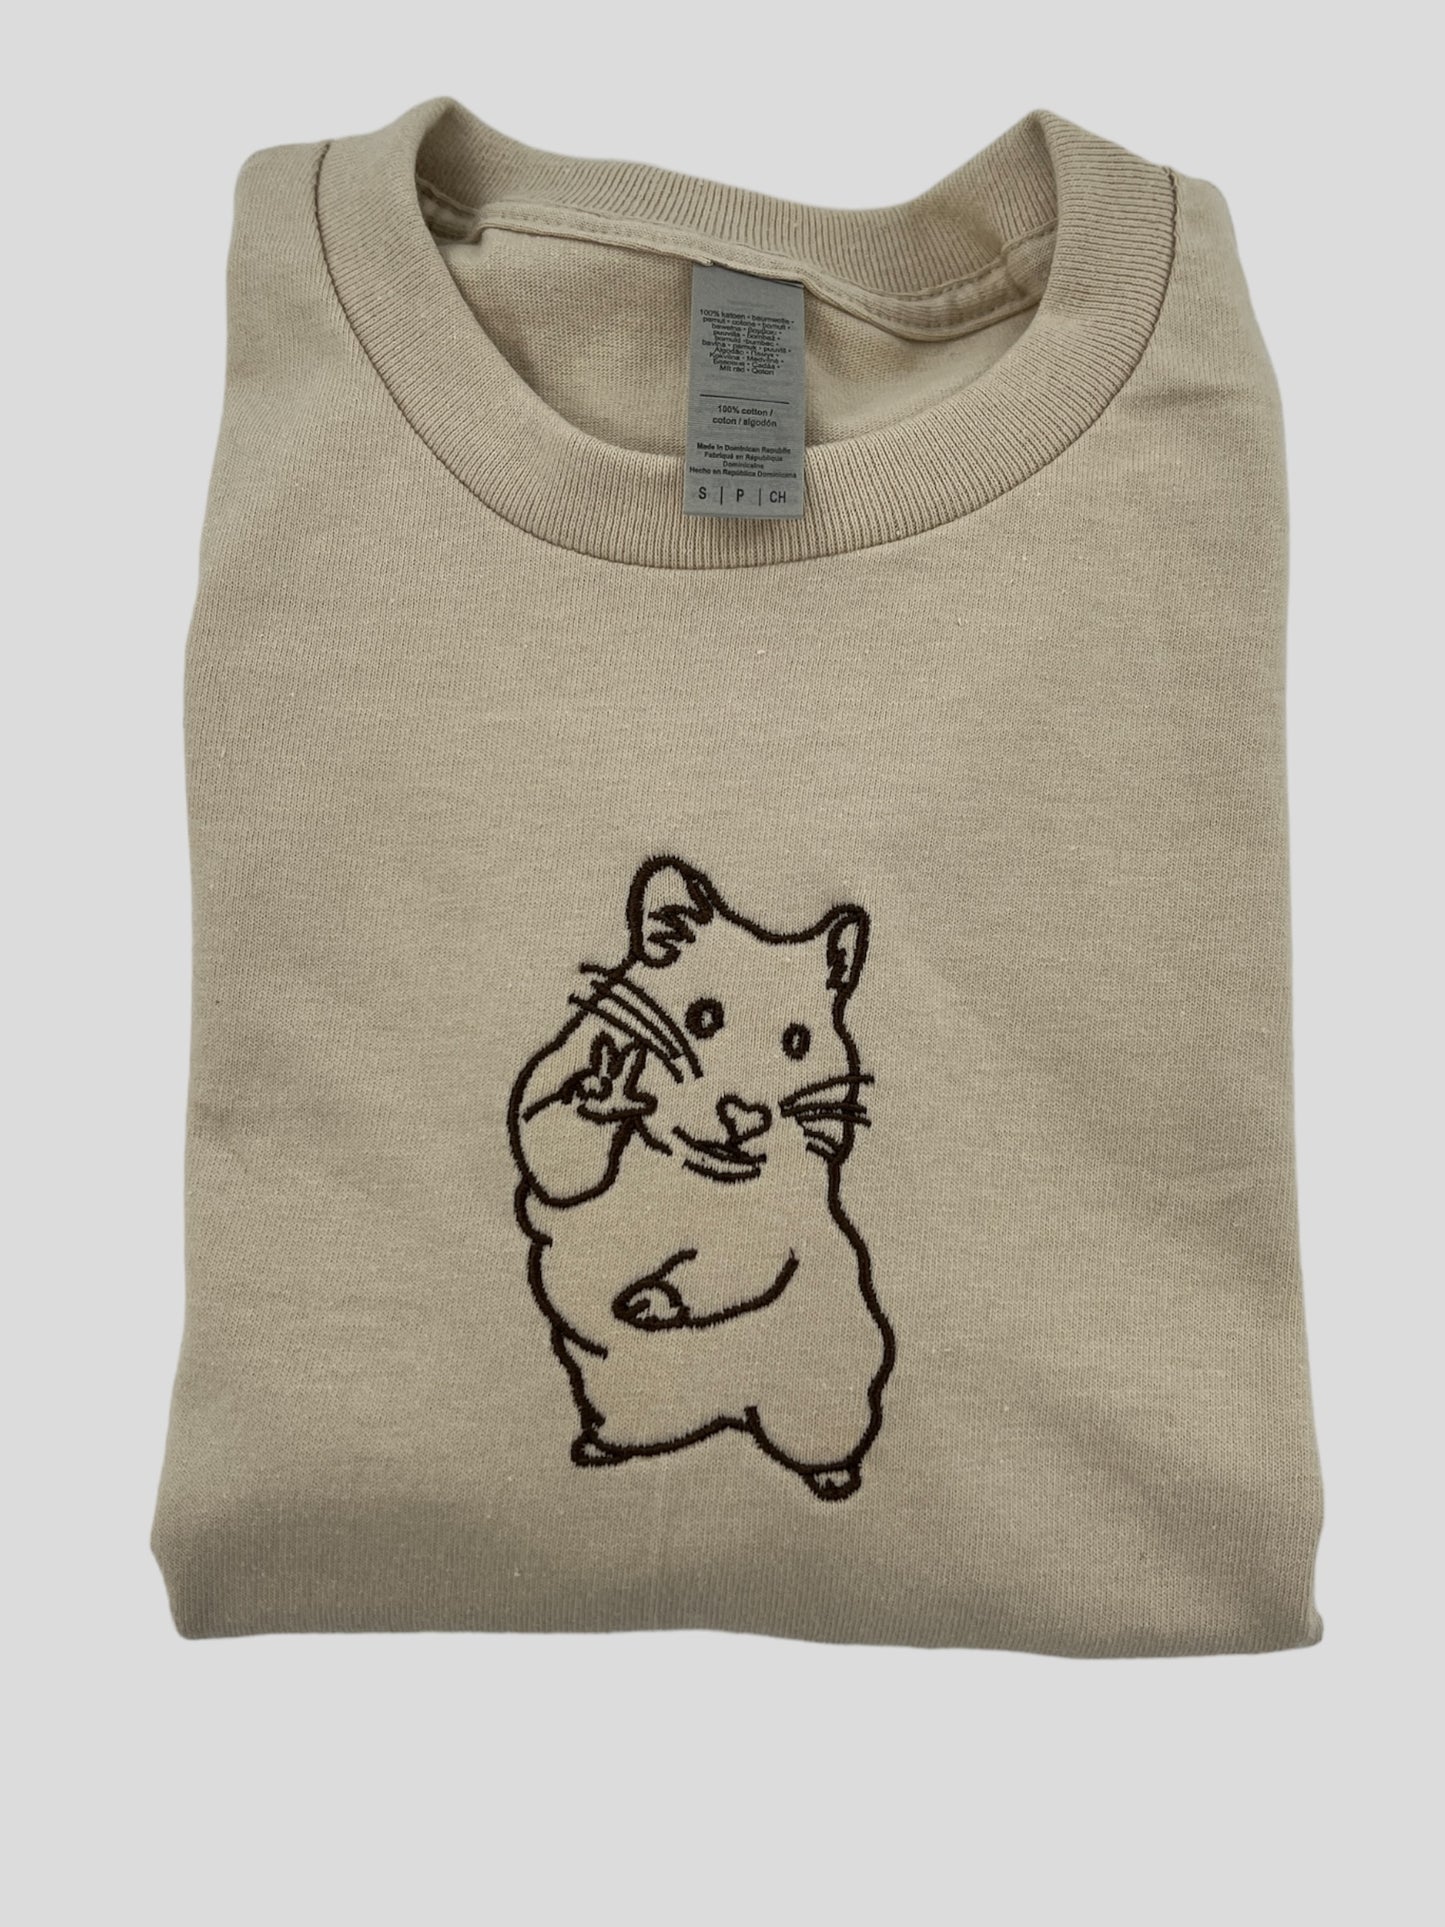 a t - shirt with a picture of a mouse on it